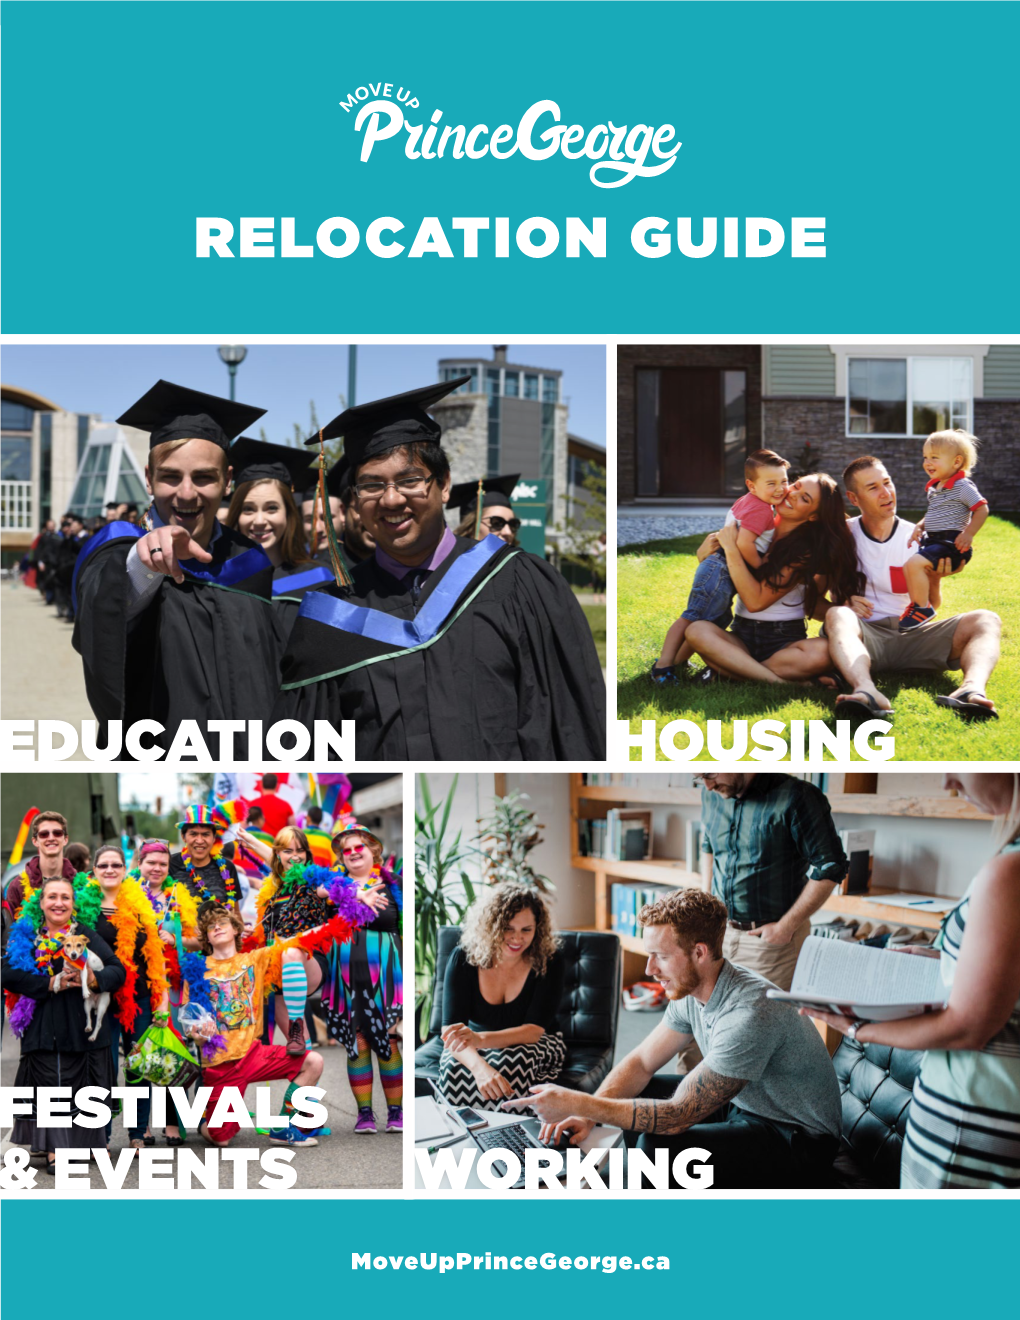 Festivals & Events Housing Working Education